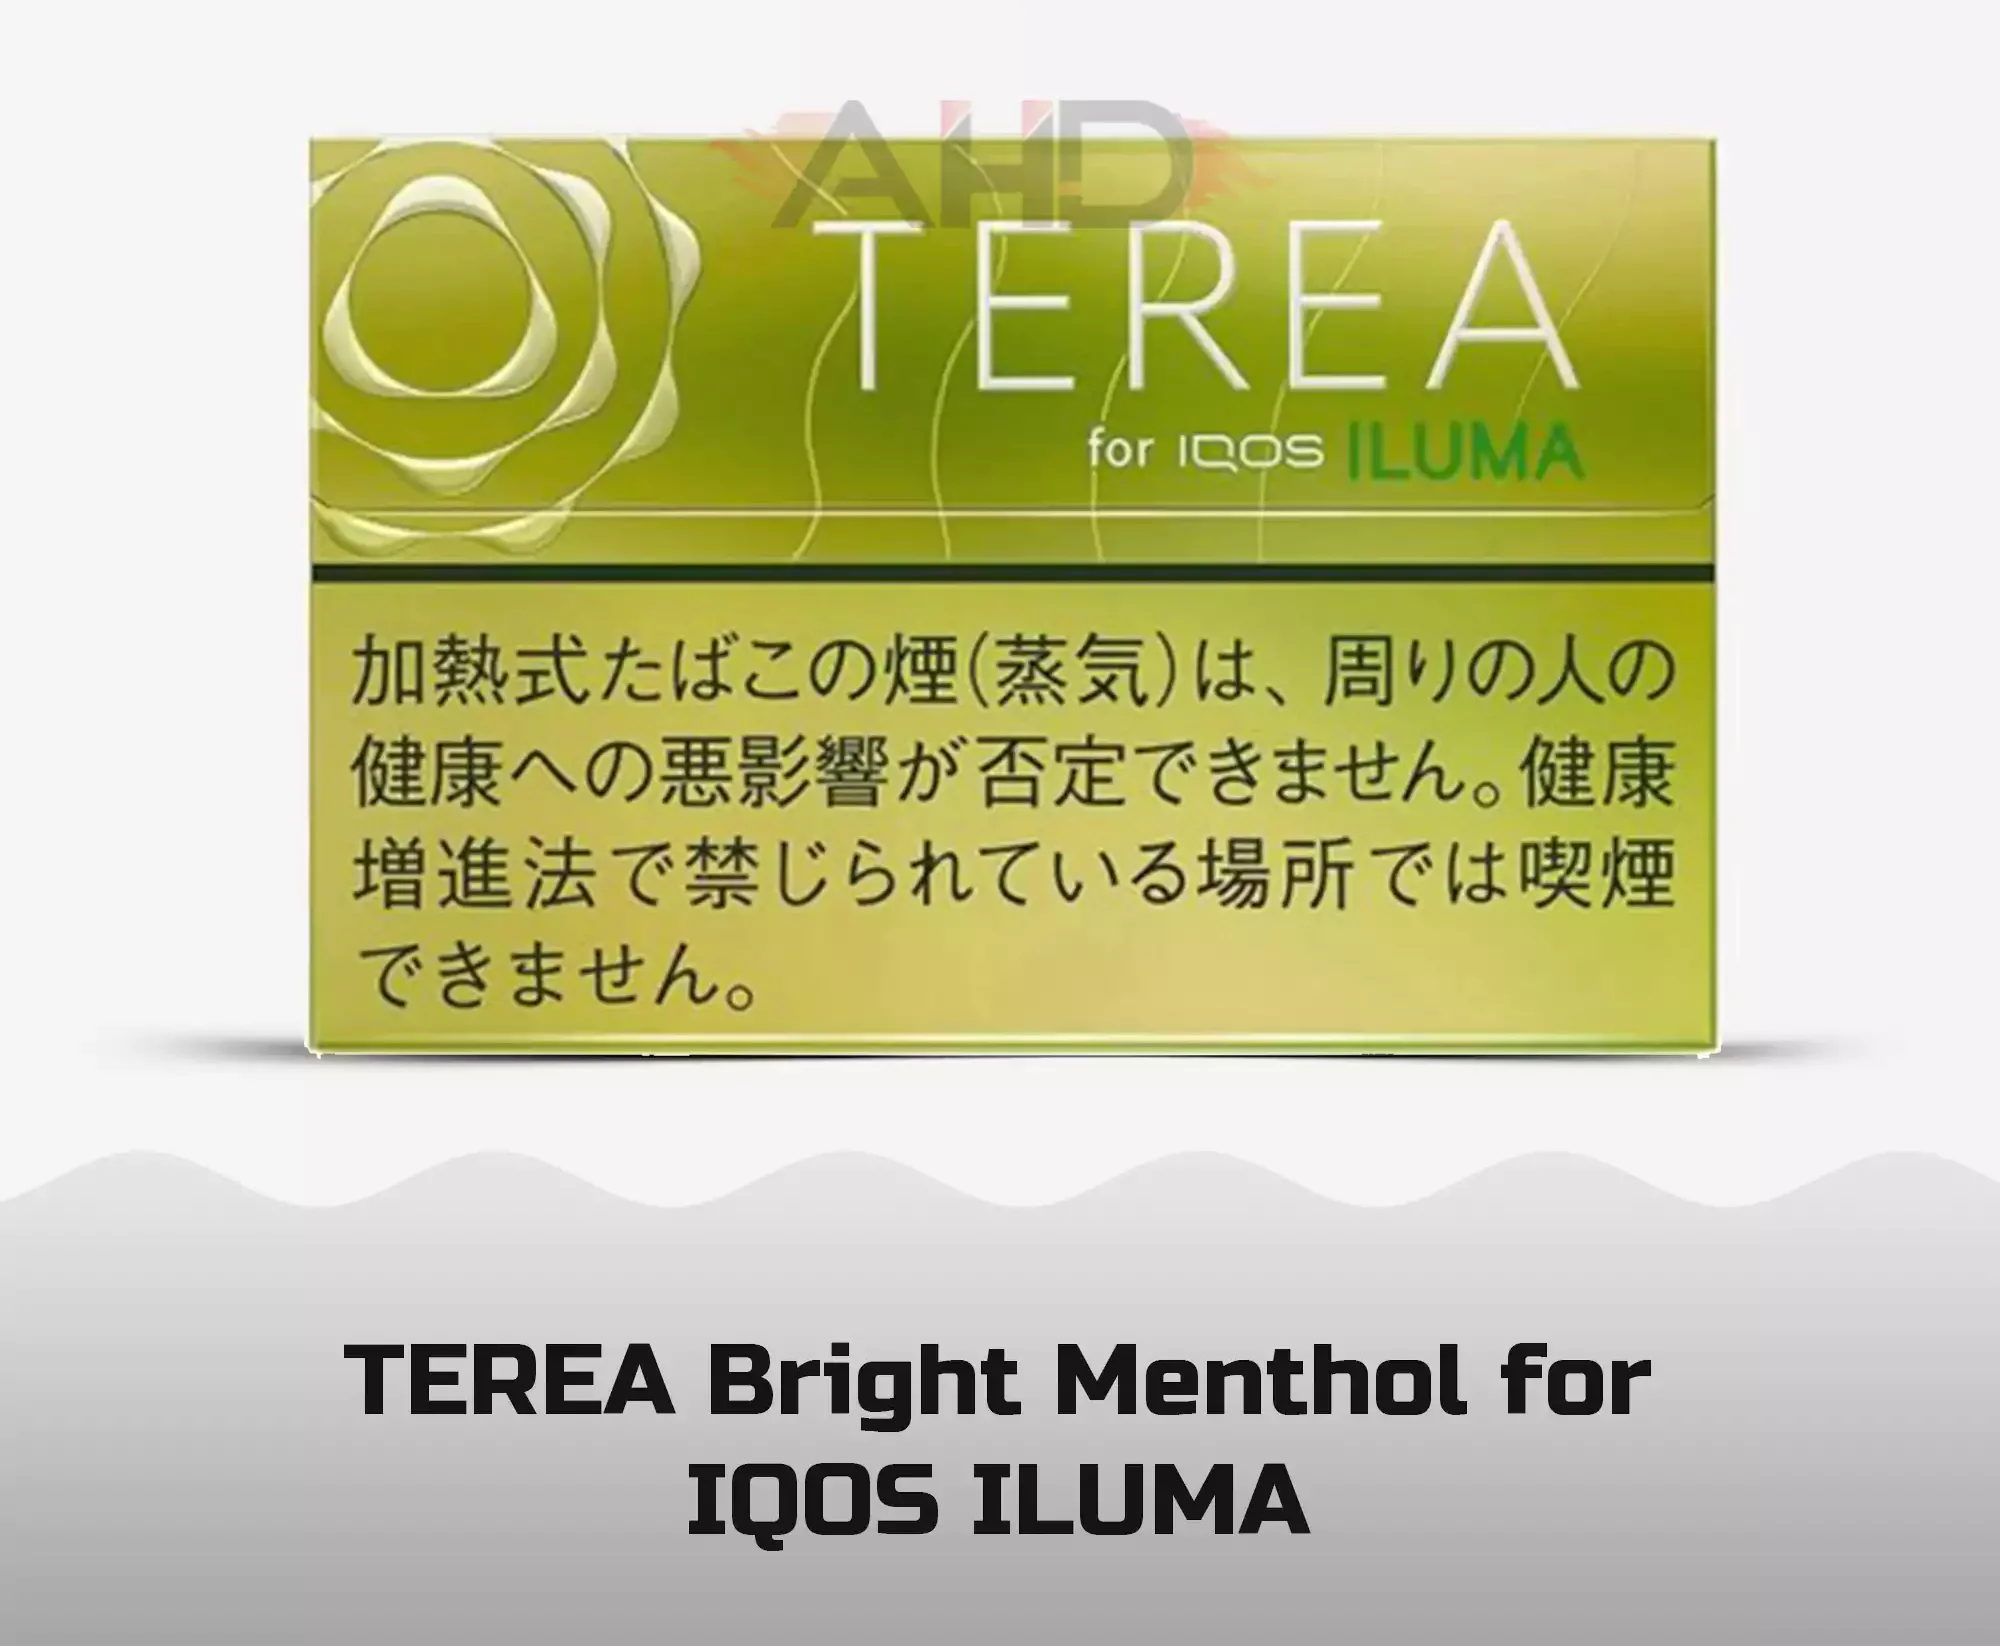 IQOS TEREA Bright Menthol In Oman